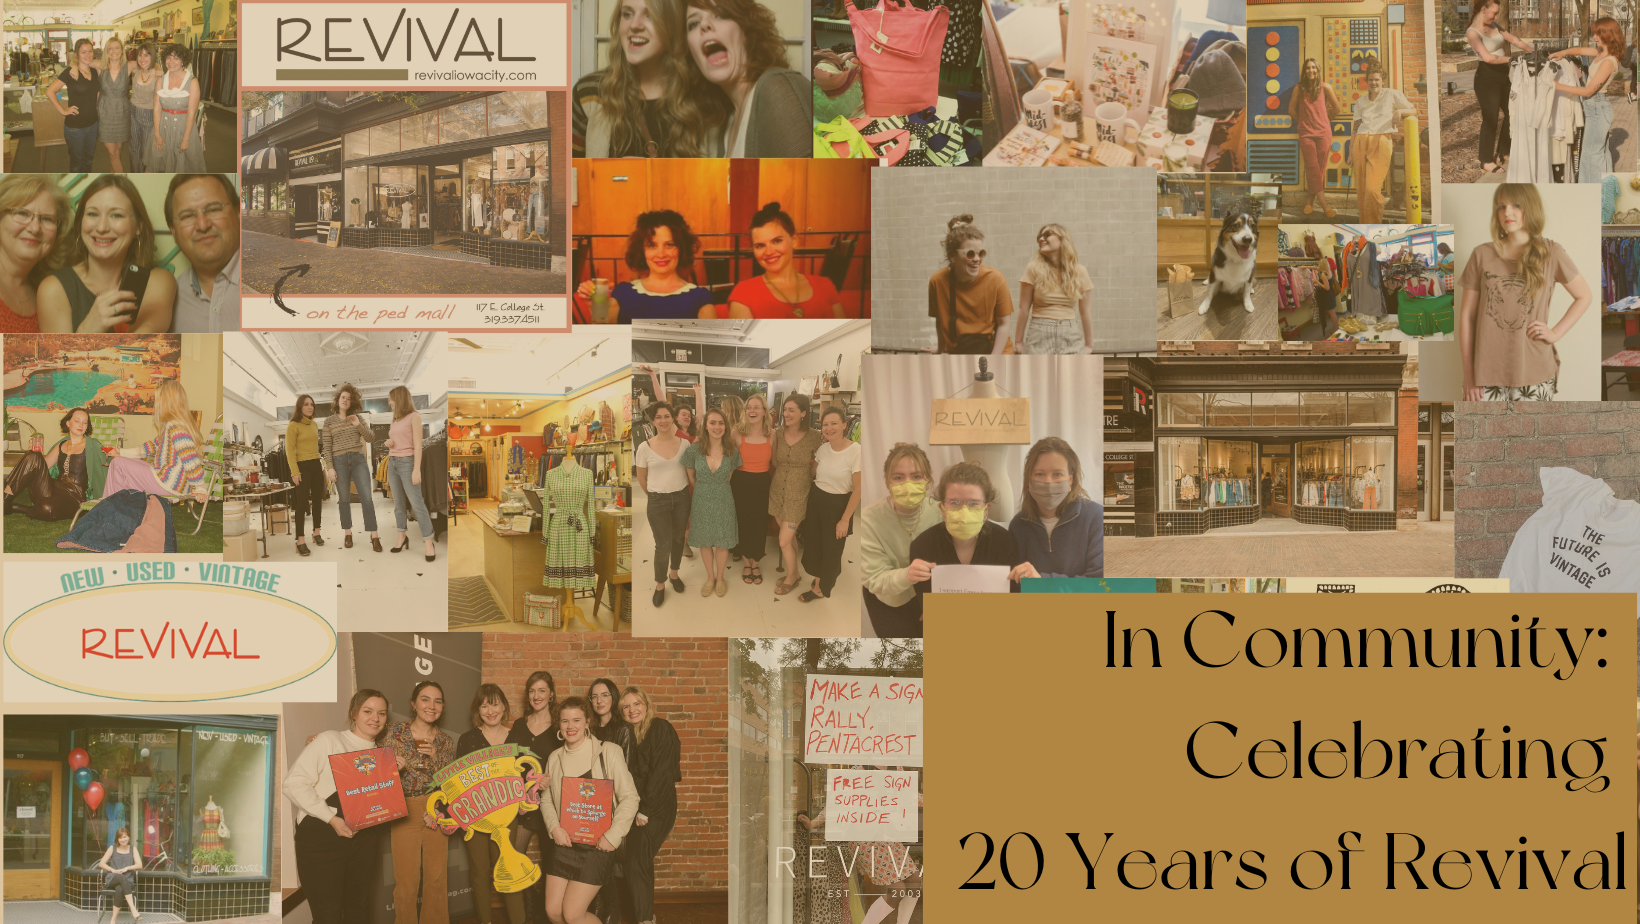 In Community: Celebrating 20 Years of Revival